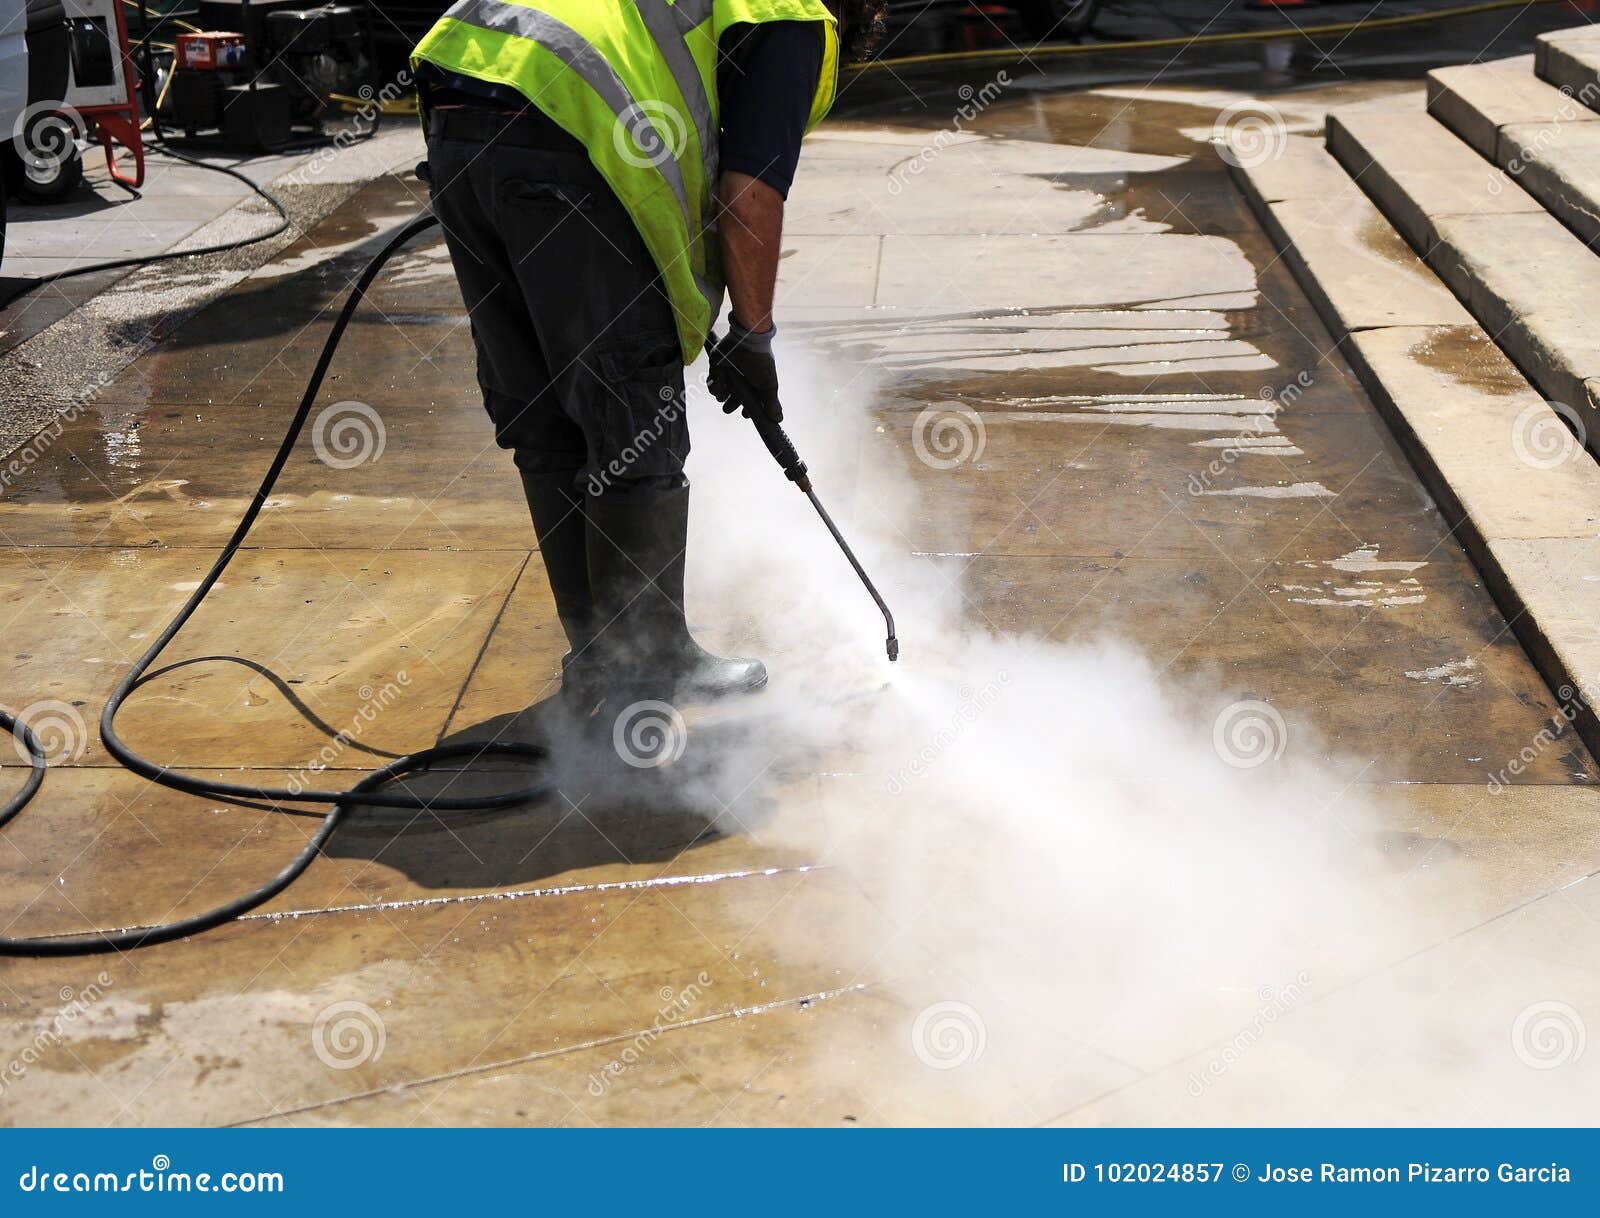 cleaning the pavement of the street with pressurized water